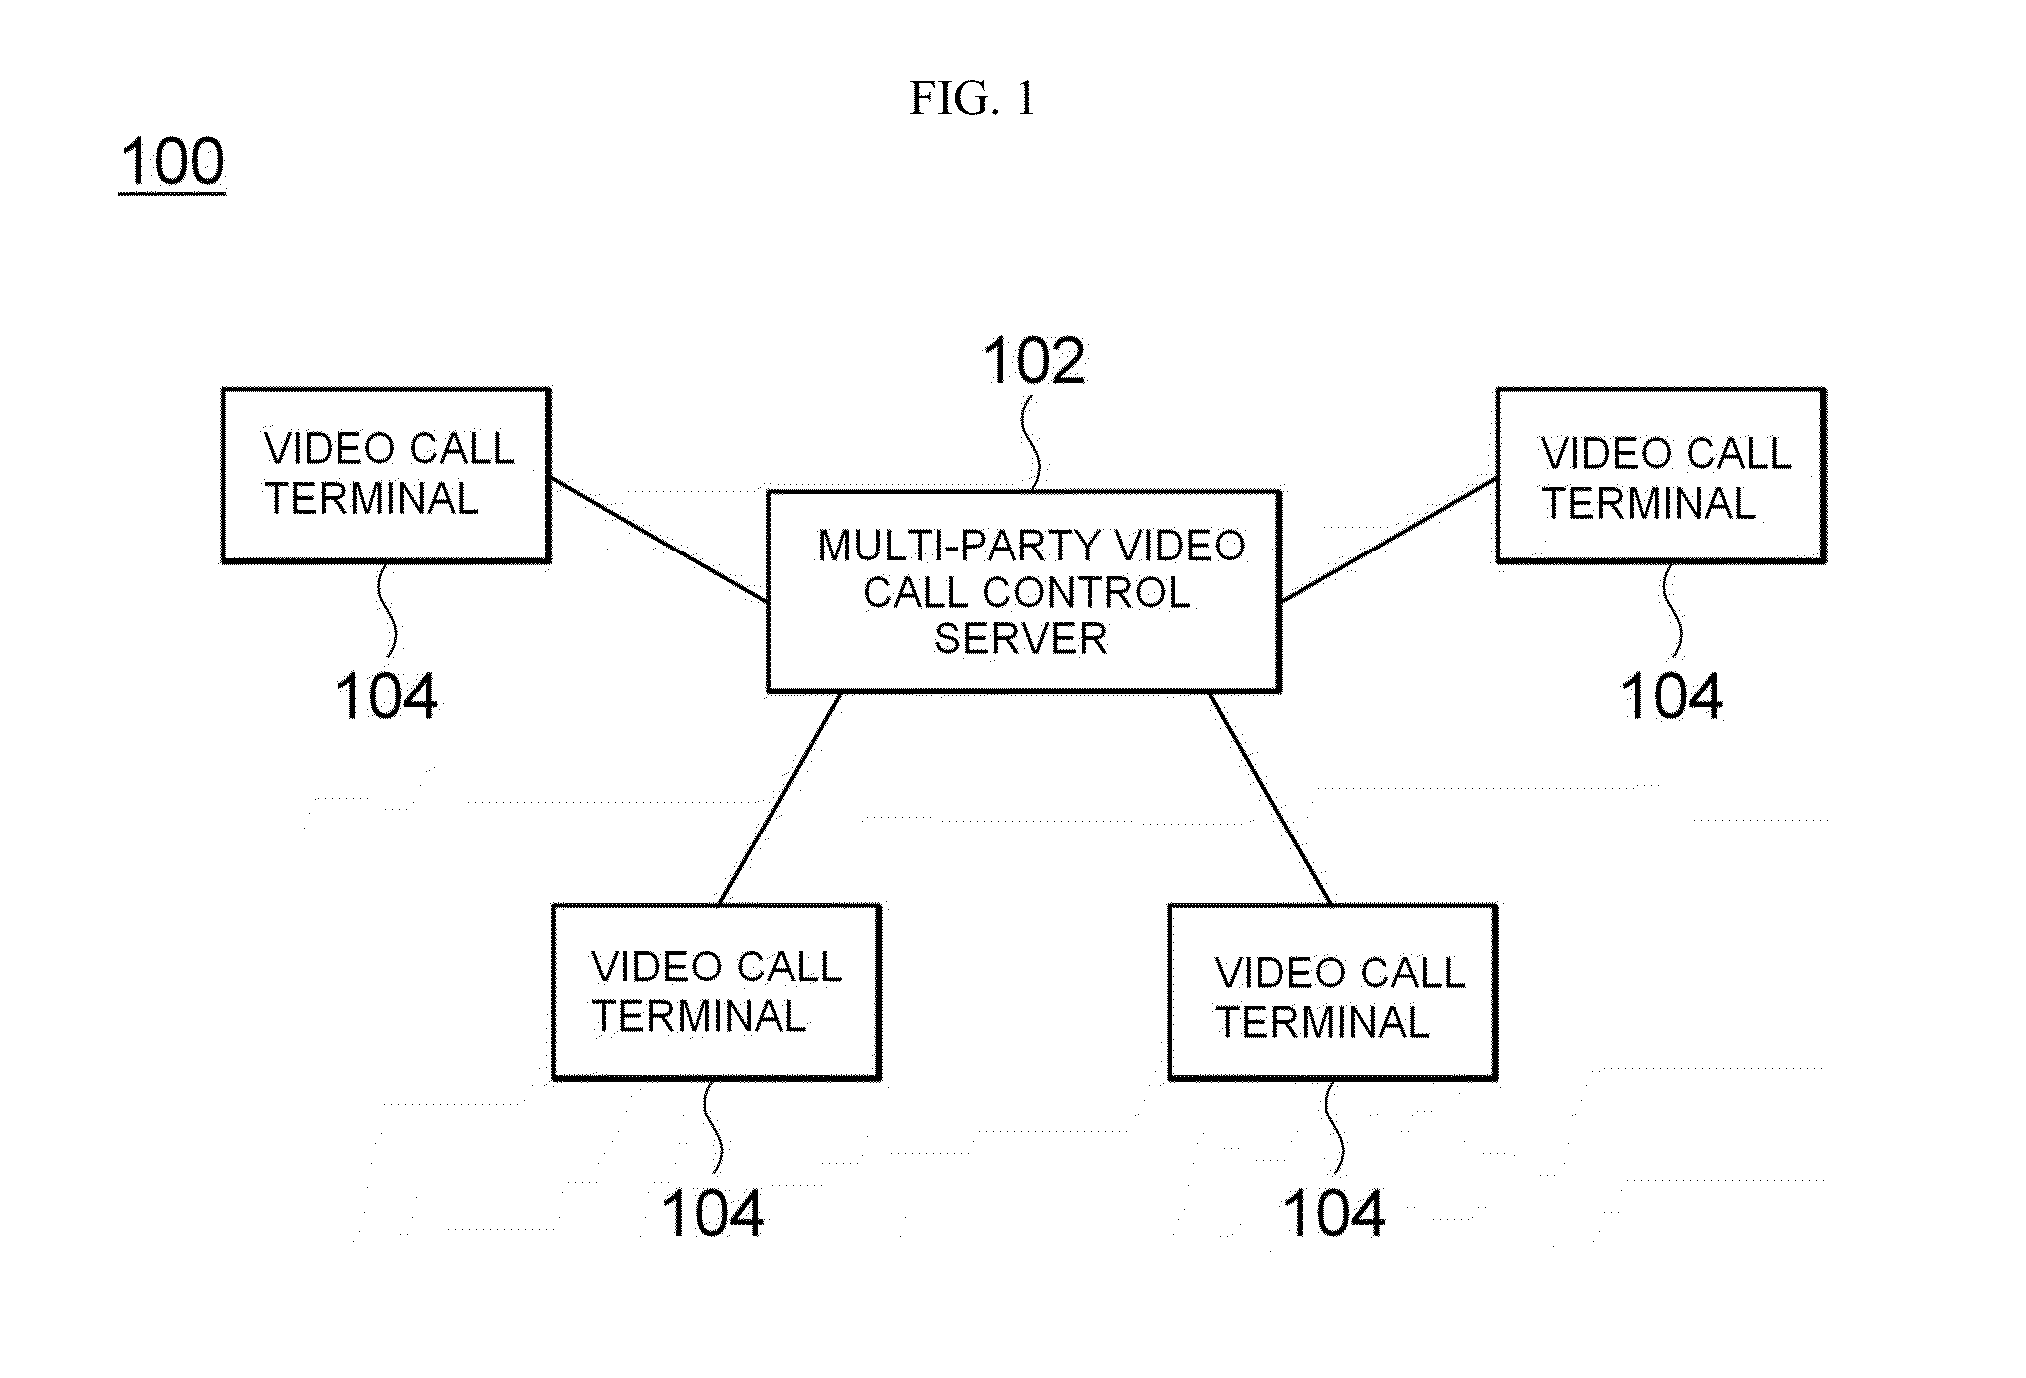 Apparatus for multi-party video call, server for controlling multi-party video call, and method of displaying multi-party image